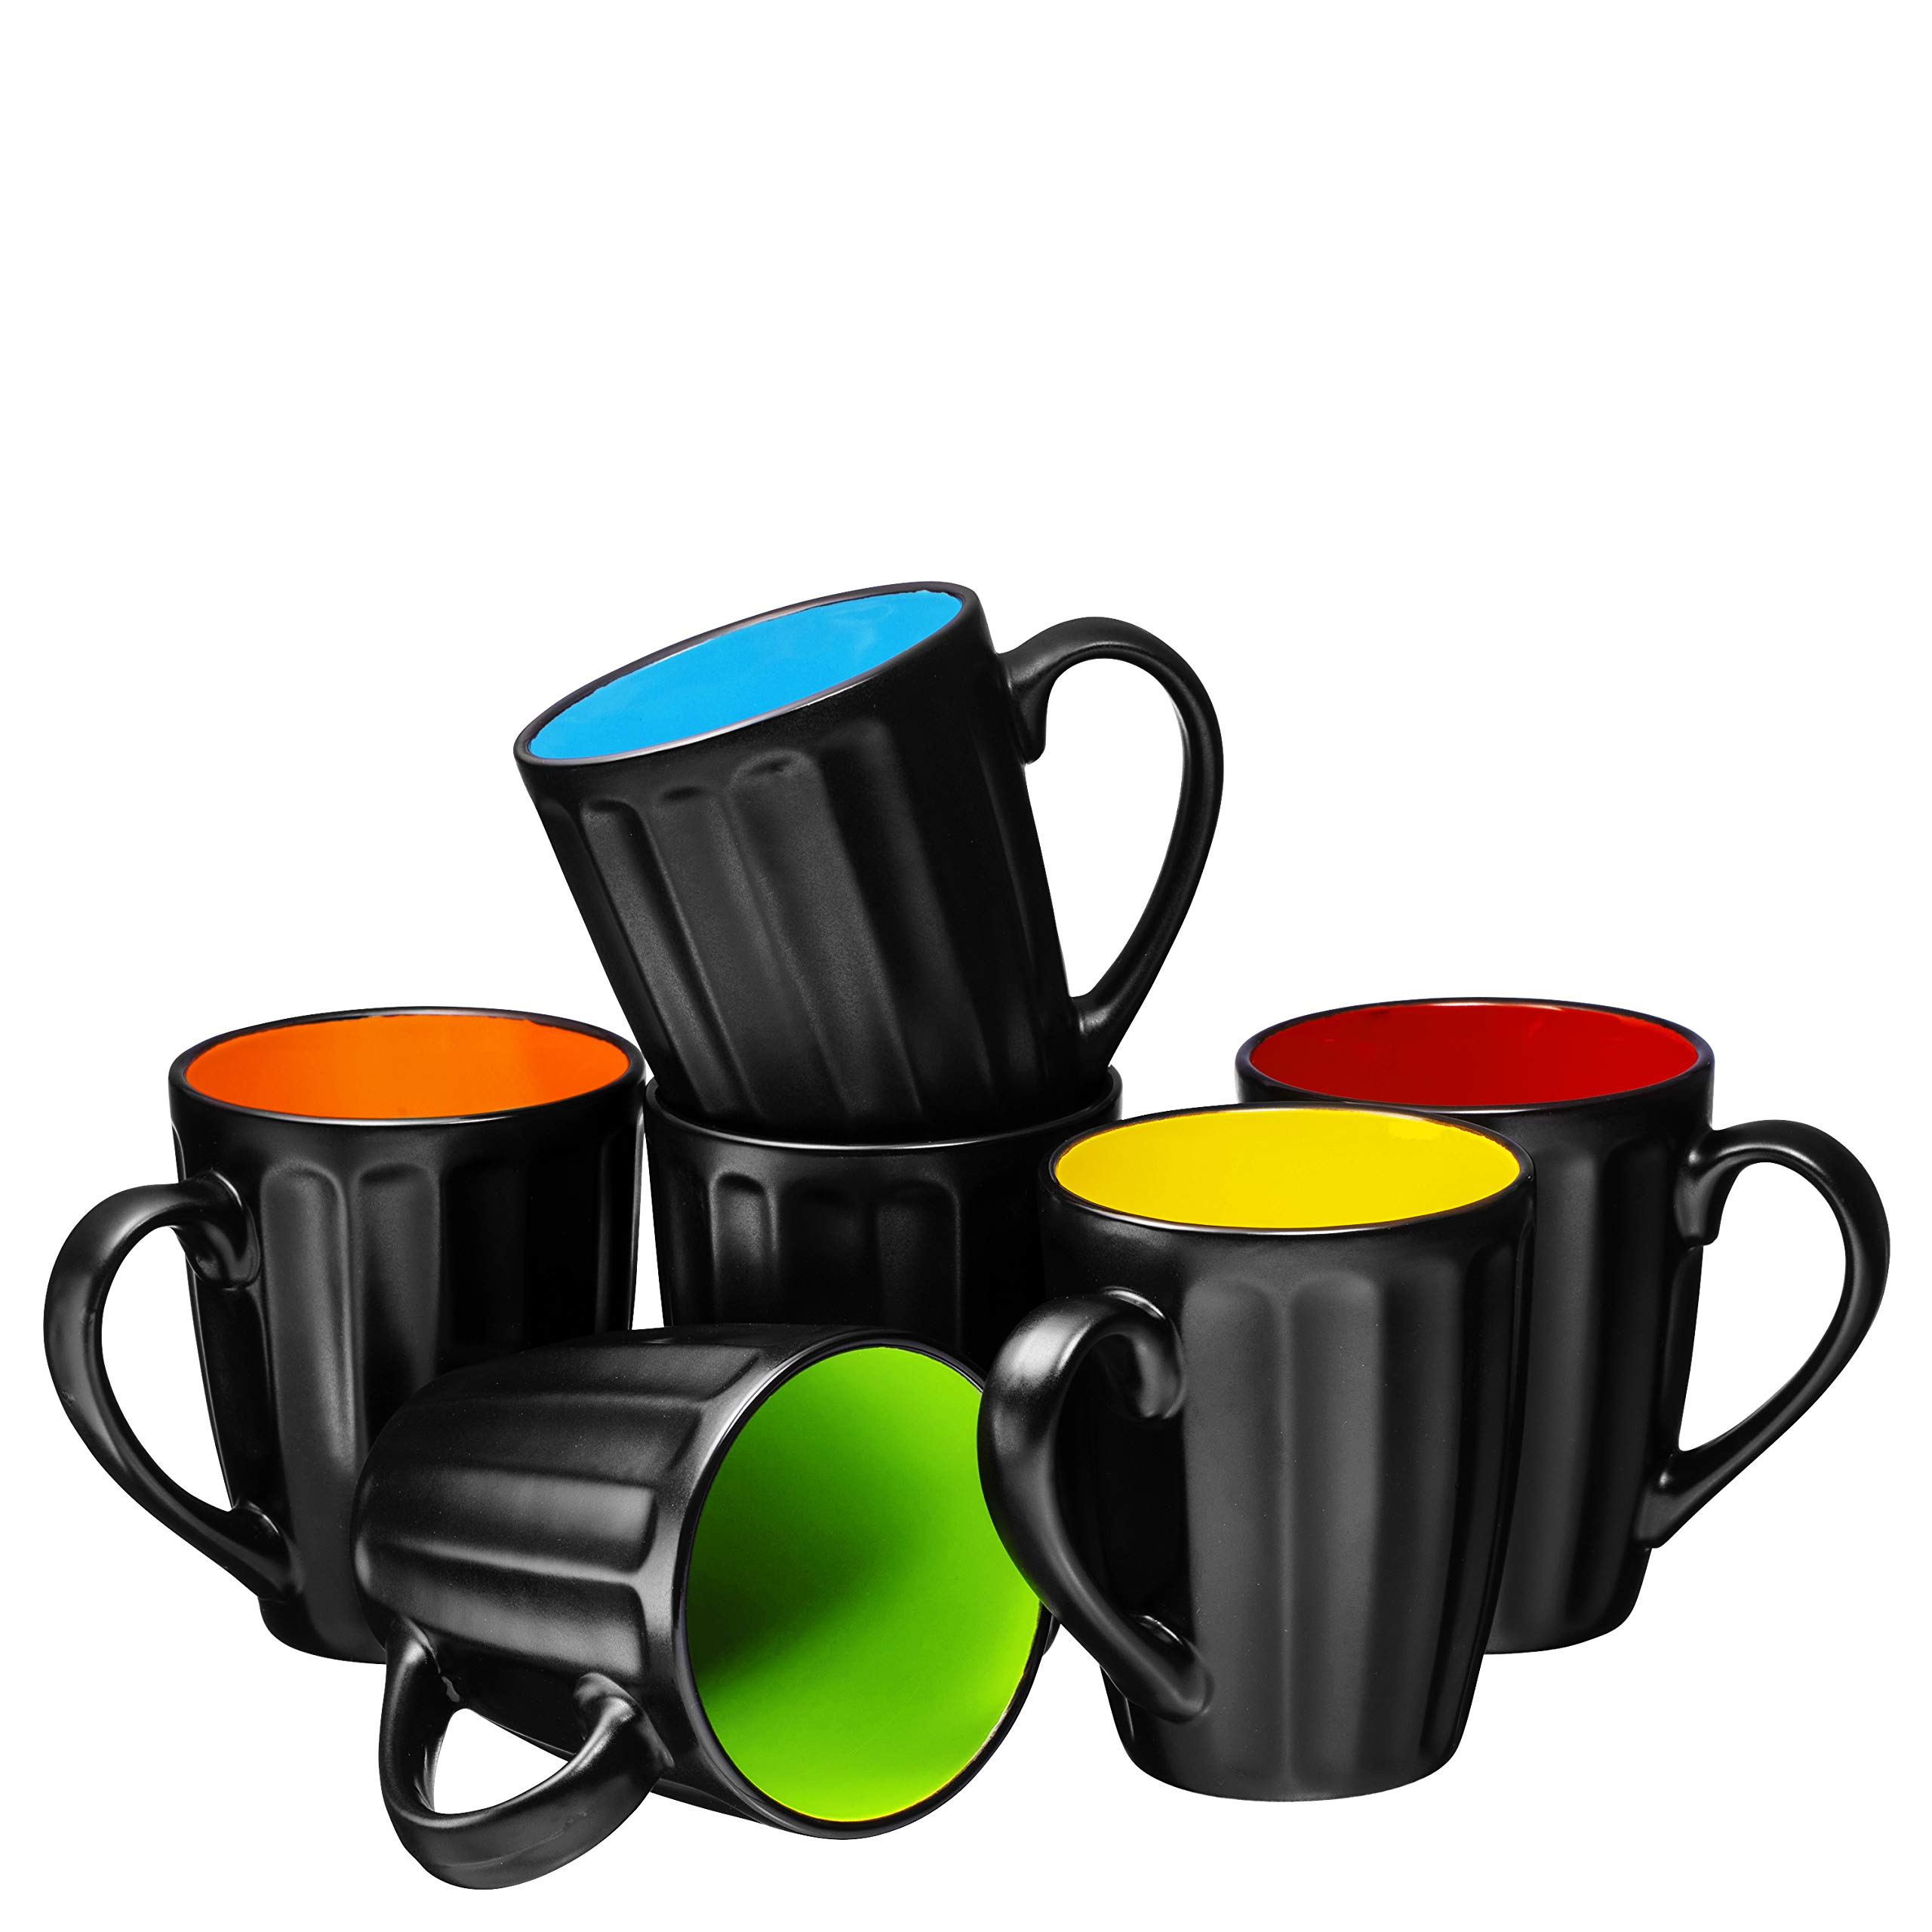 Set of 6 Large-sized 16 Ounce Ceramic Coffee Grooved Mugs, Matte Black